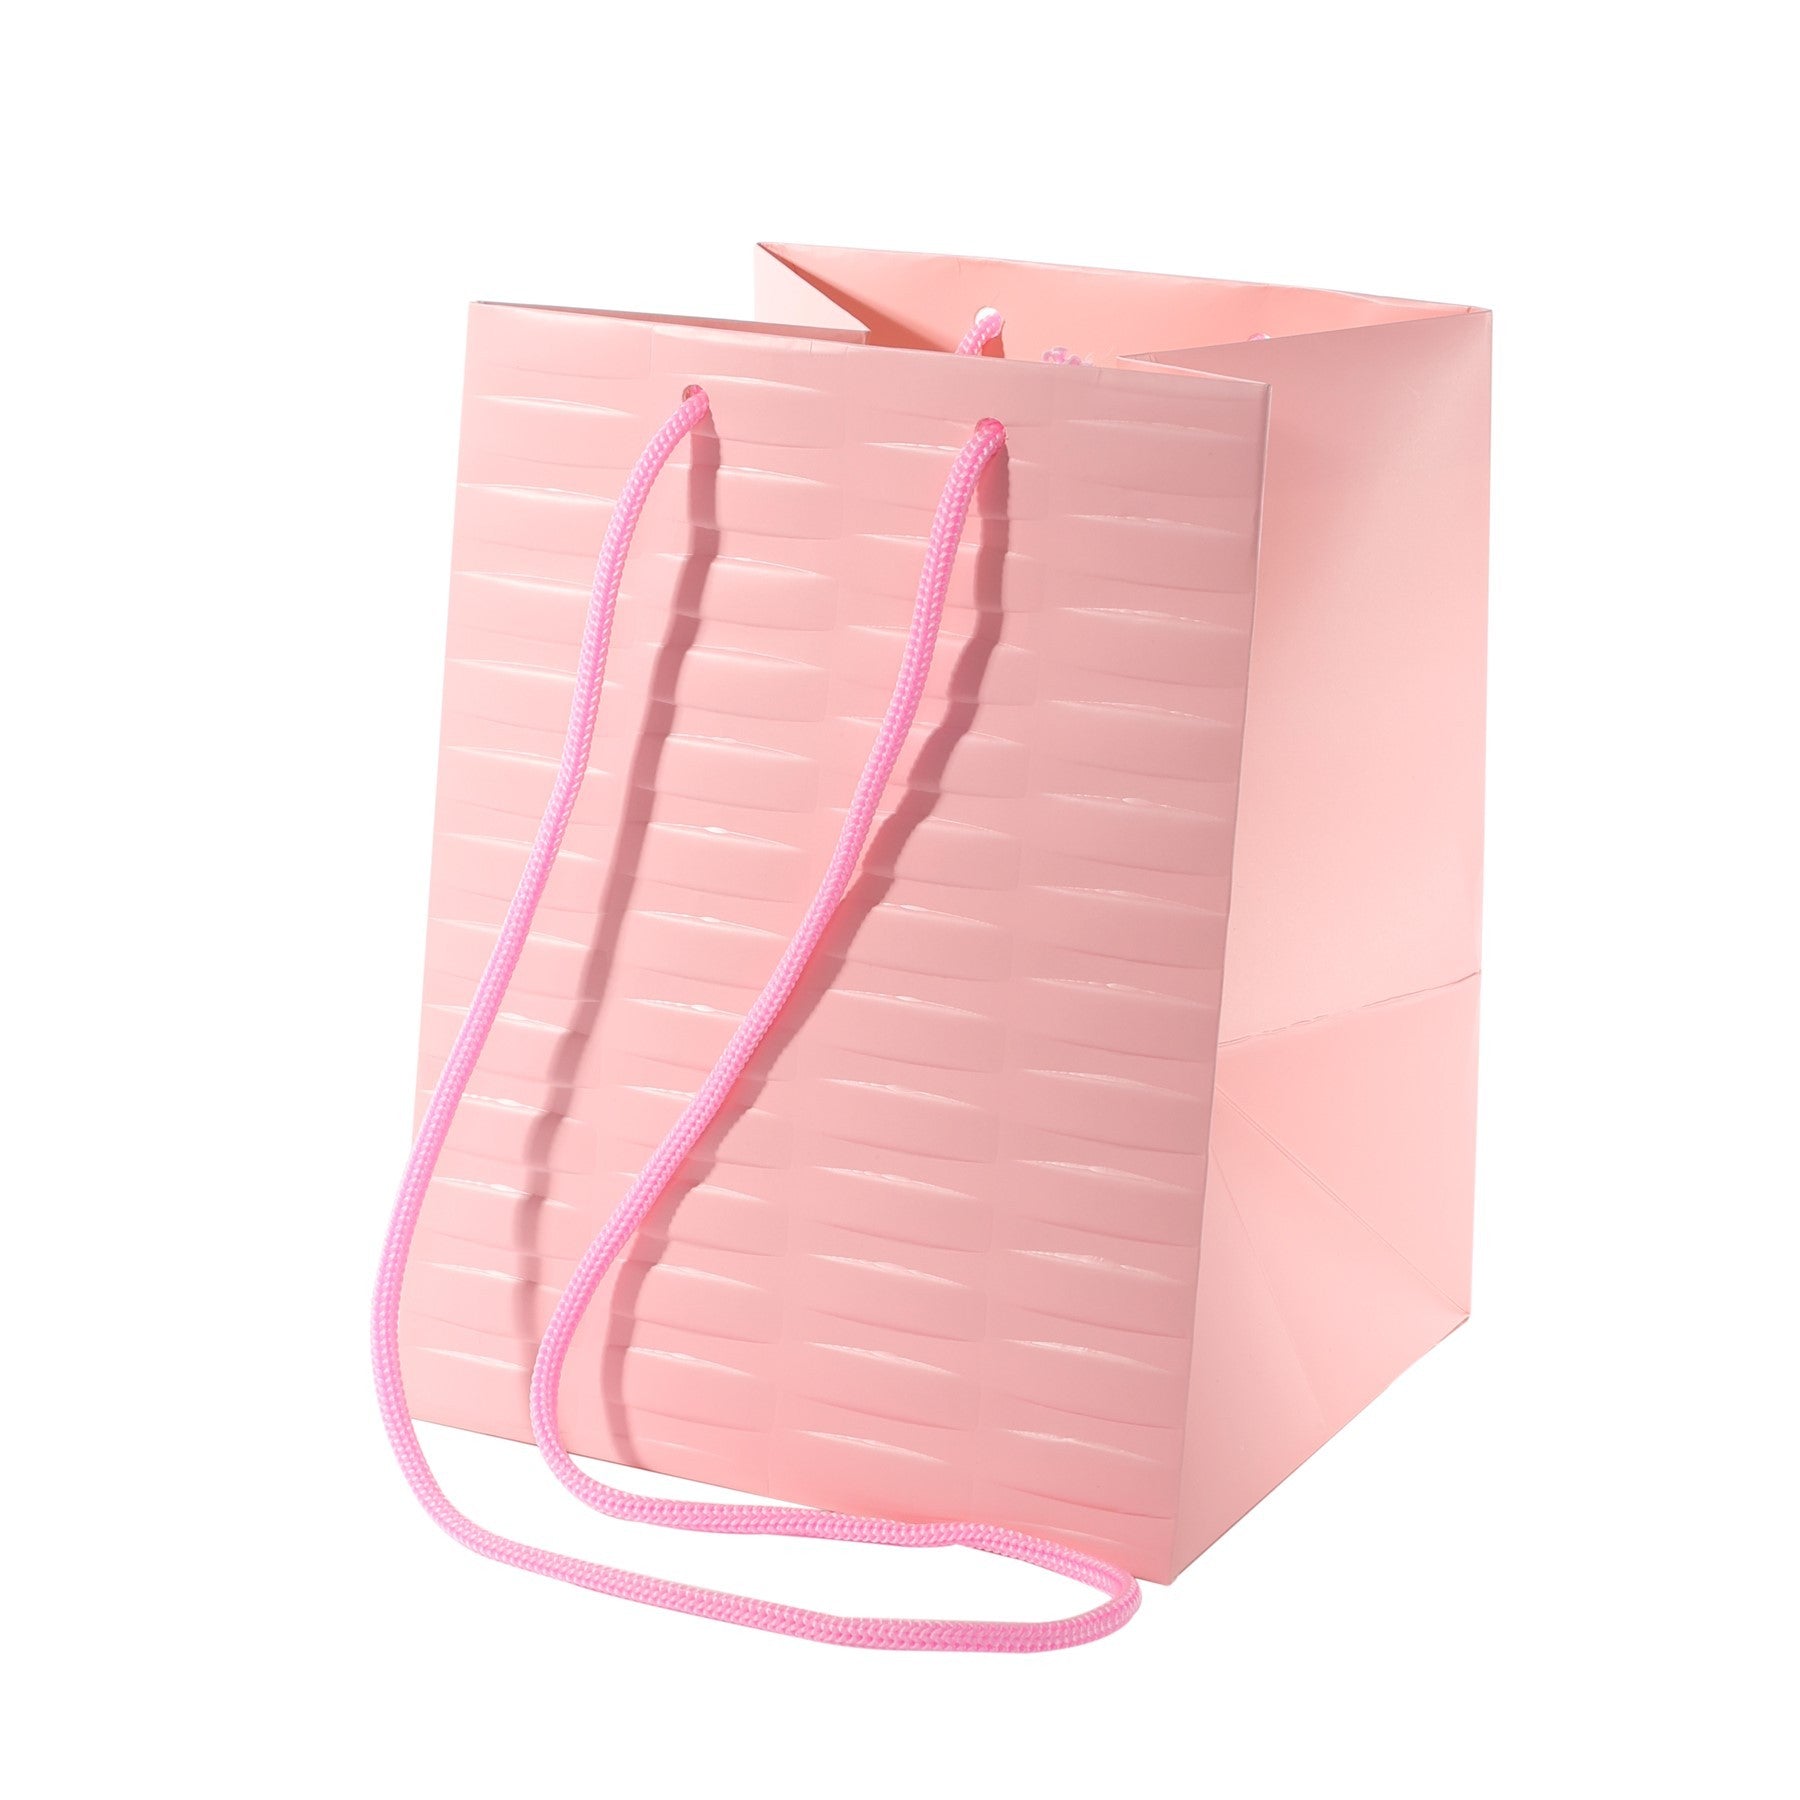 View Pink Woven Textured Hand Tie Bag 19x25cm information